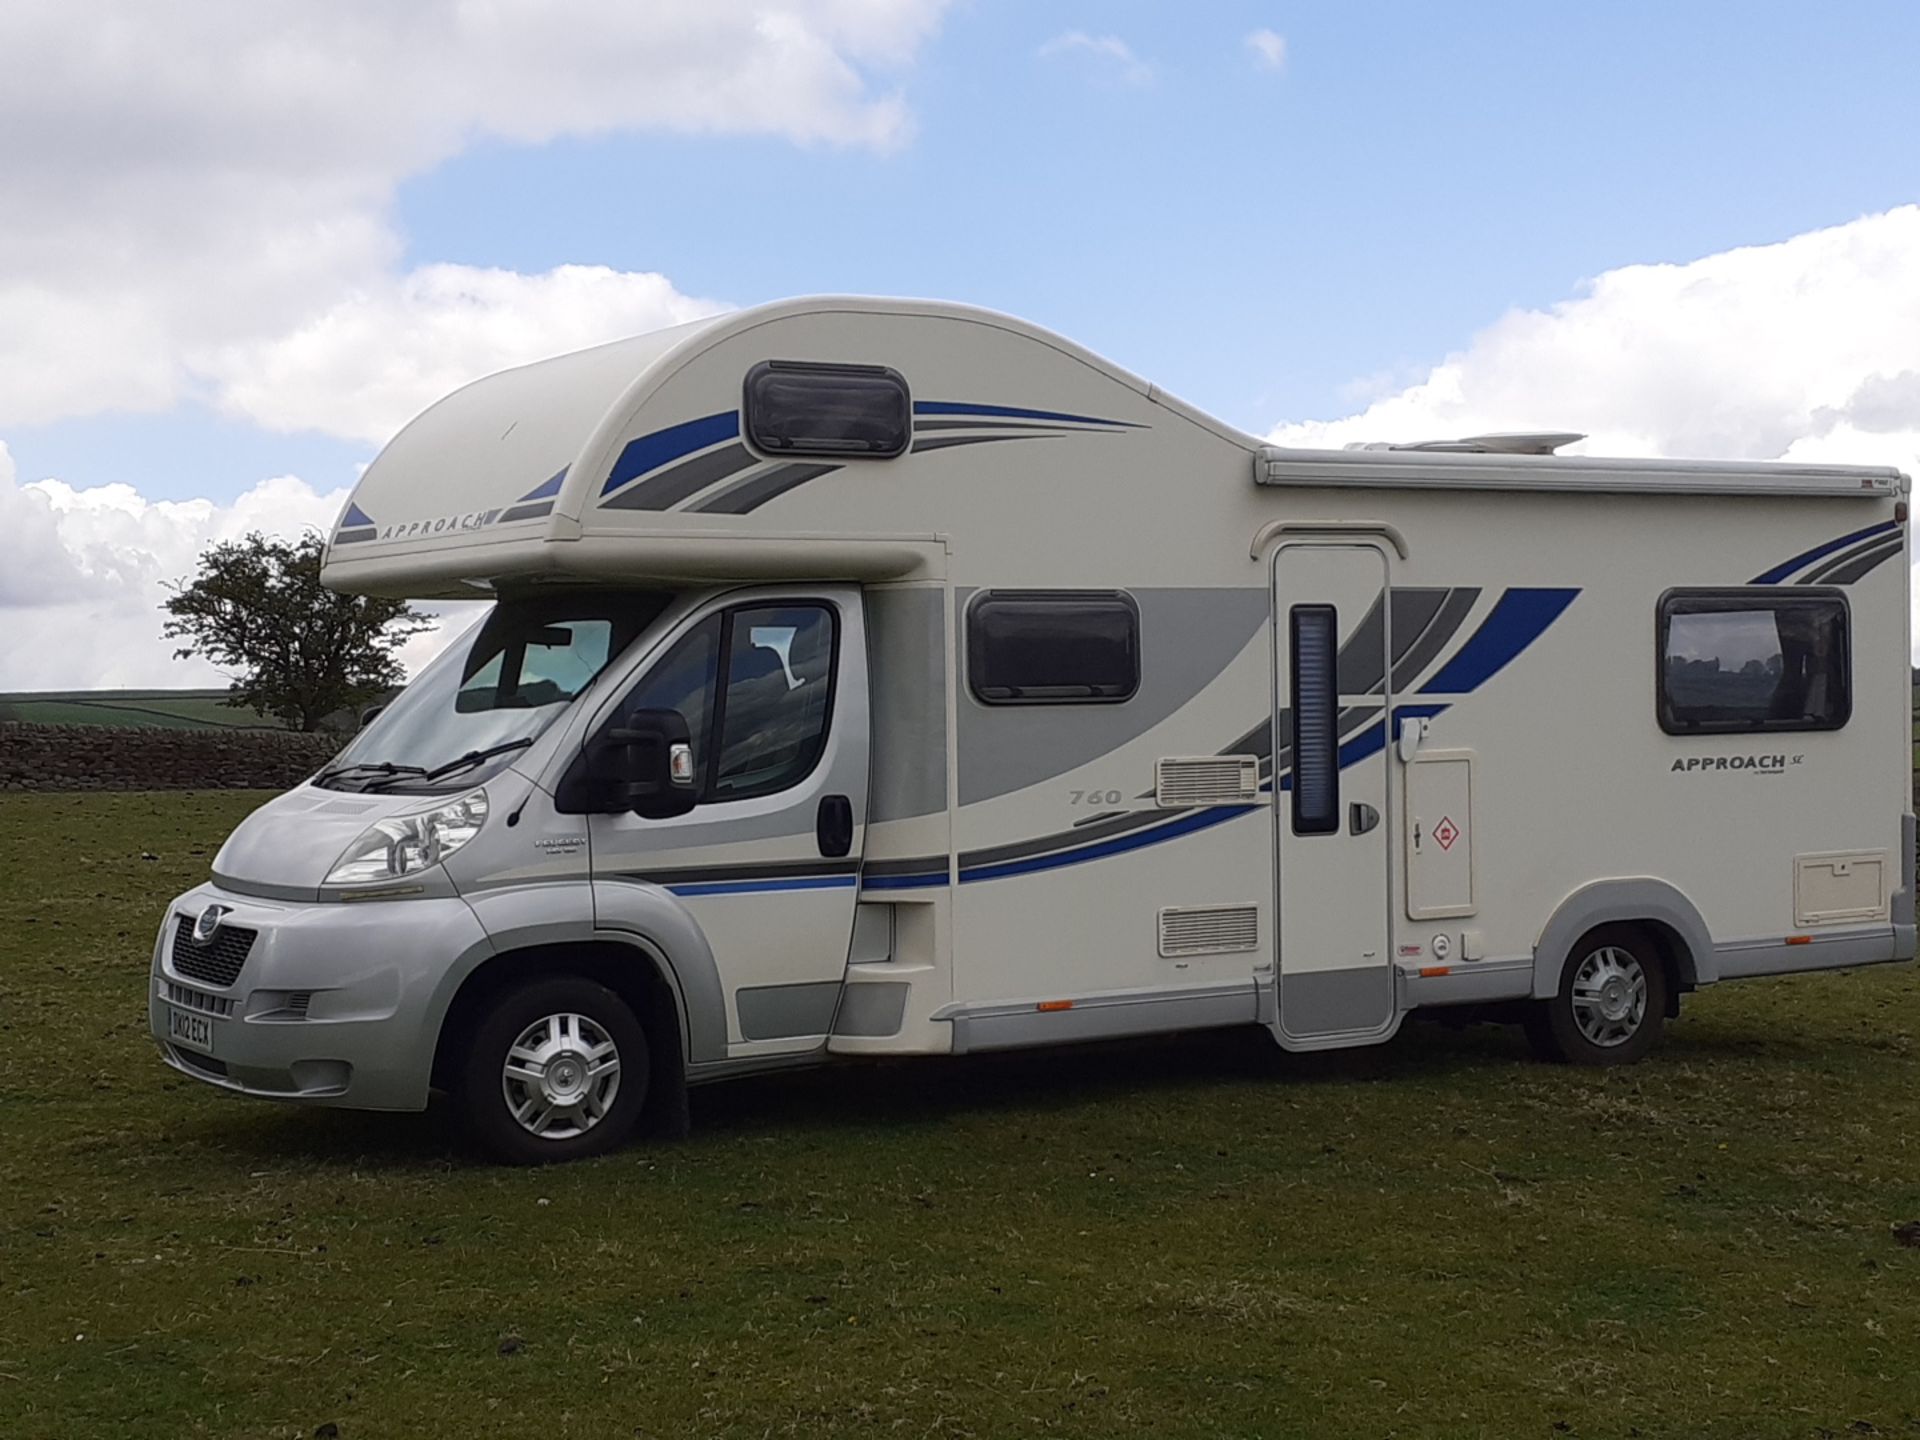 2012 BAILEY APPROACH 760 SE LUXURY 6 BERTH MOTORHOME £10K OF EXTRAS, 30,000 MILES FROM NEW - Image 5 of 31